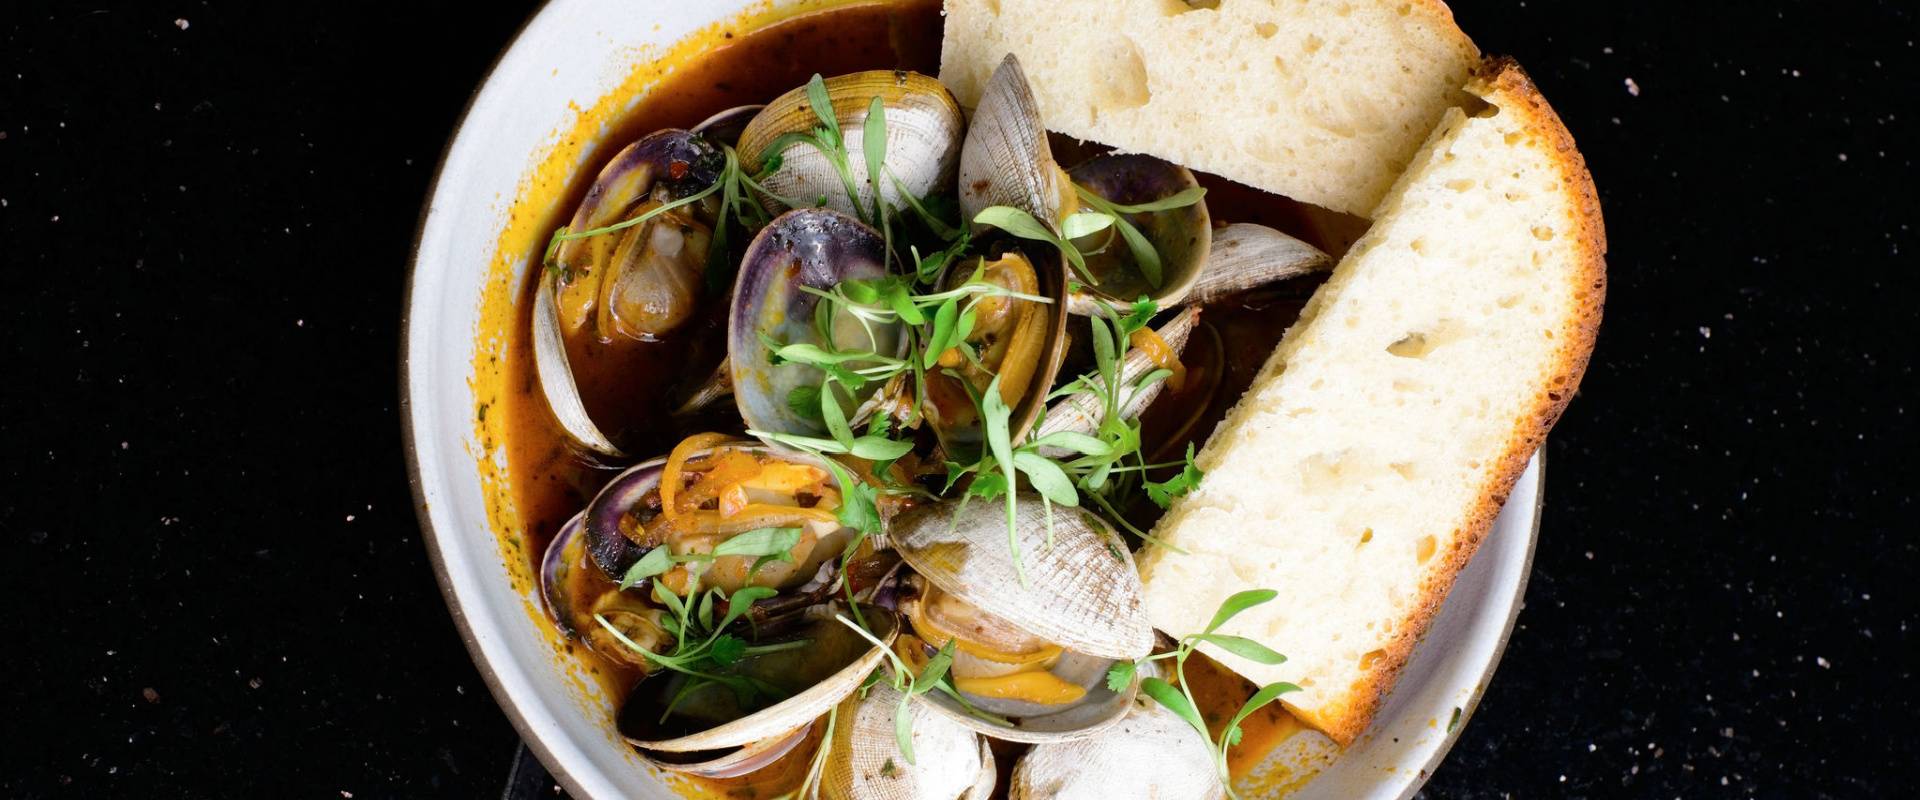 Steamed Manila Clams at Red Cork Bistro in Mukilteo